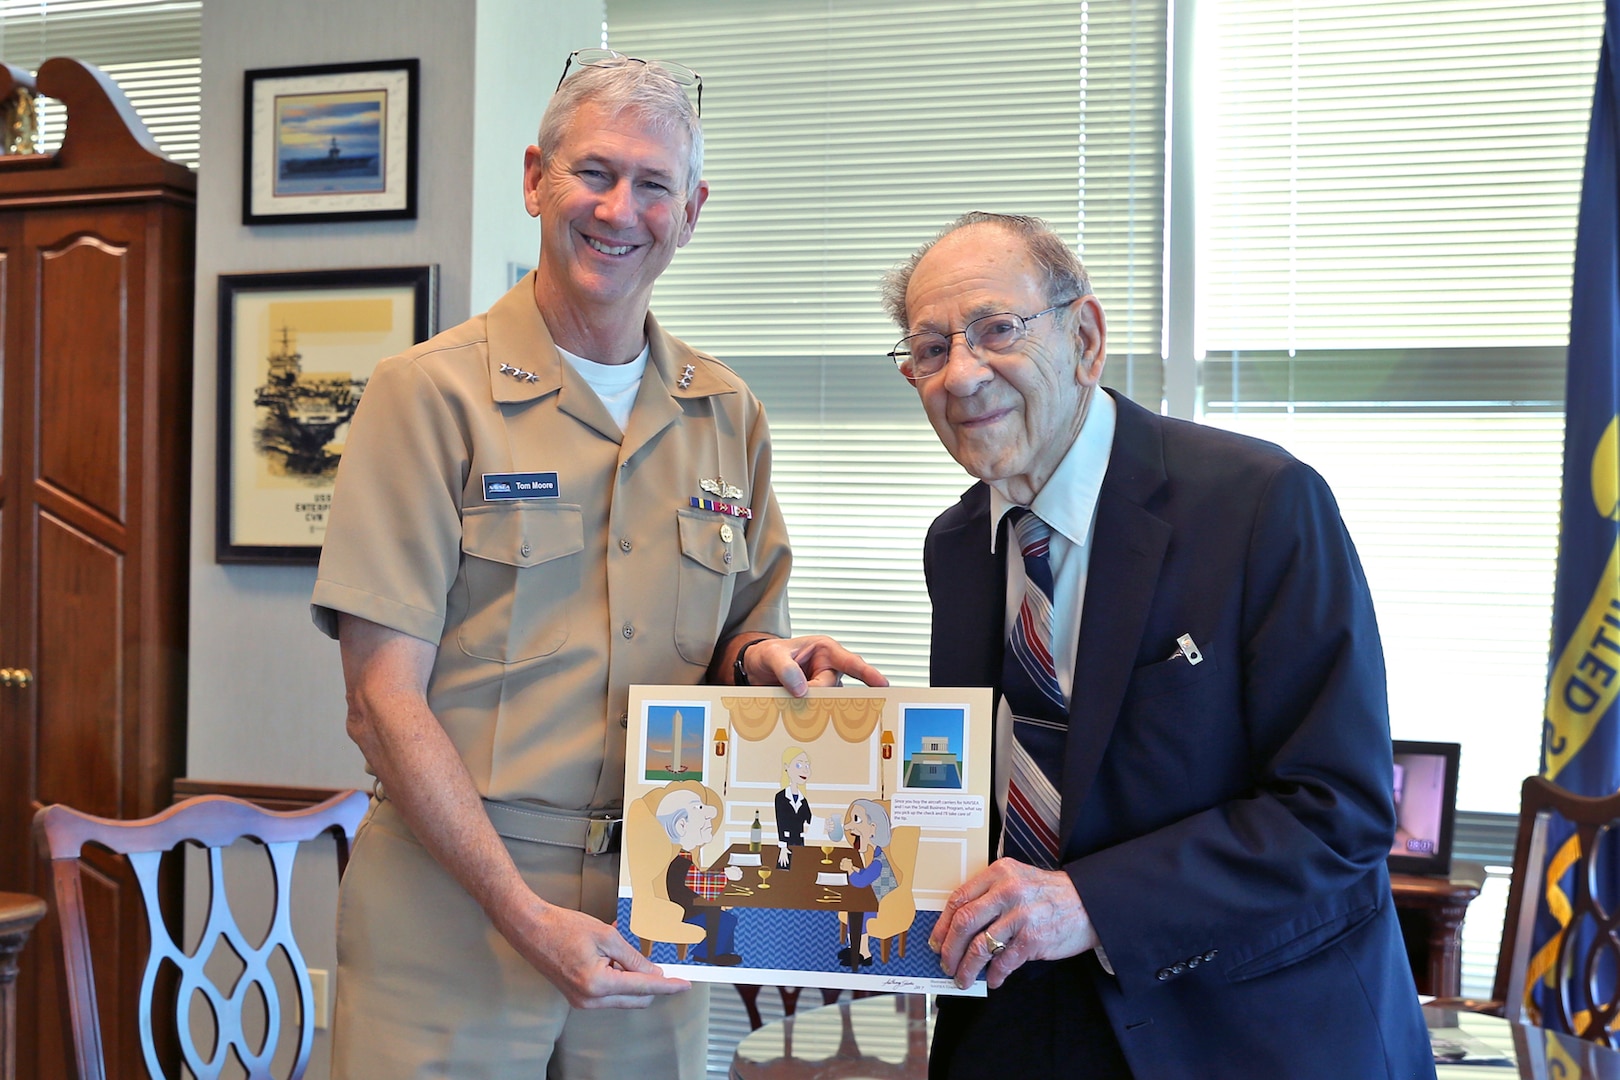 Sarkis Tatigian celebrated 75 years of service with Vice Adm. Thomas Moore, commander, Naval Sea Systems Command (NAVSEA).